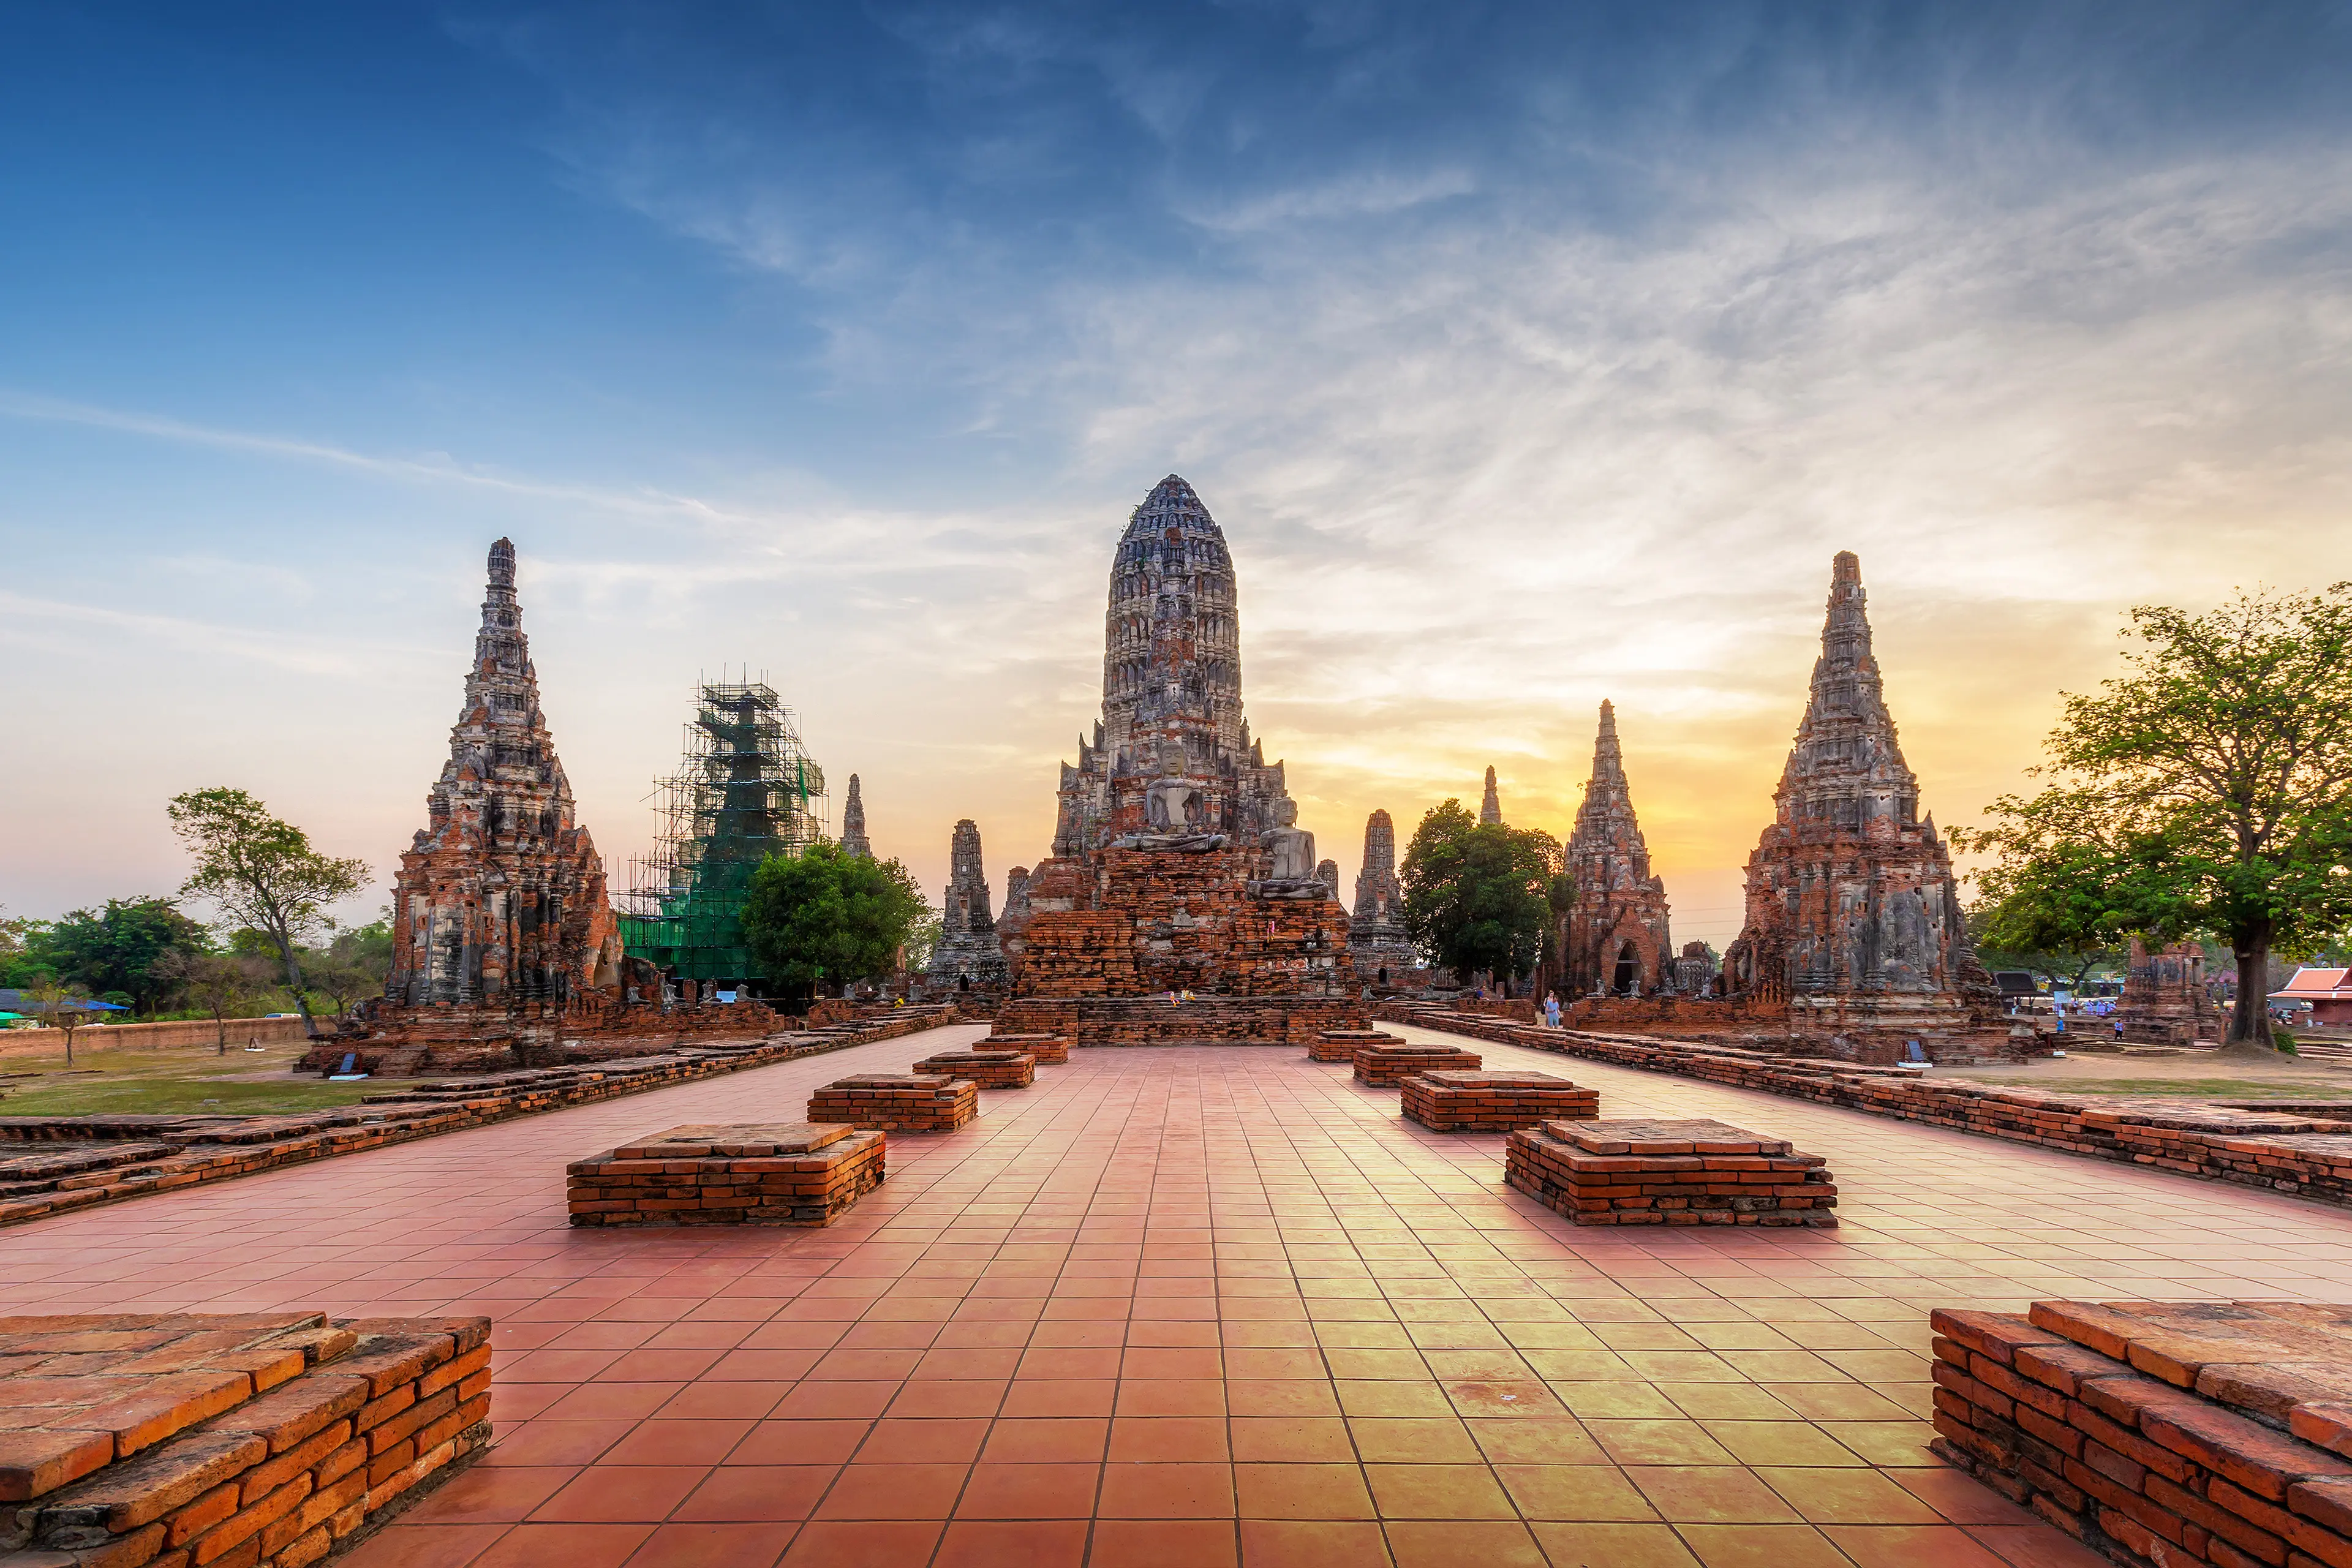 1-Day Solo Adventure and Sightseeing Itinerary in Ayutthaya